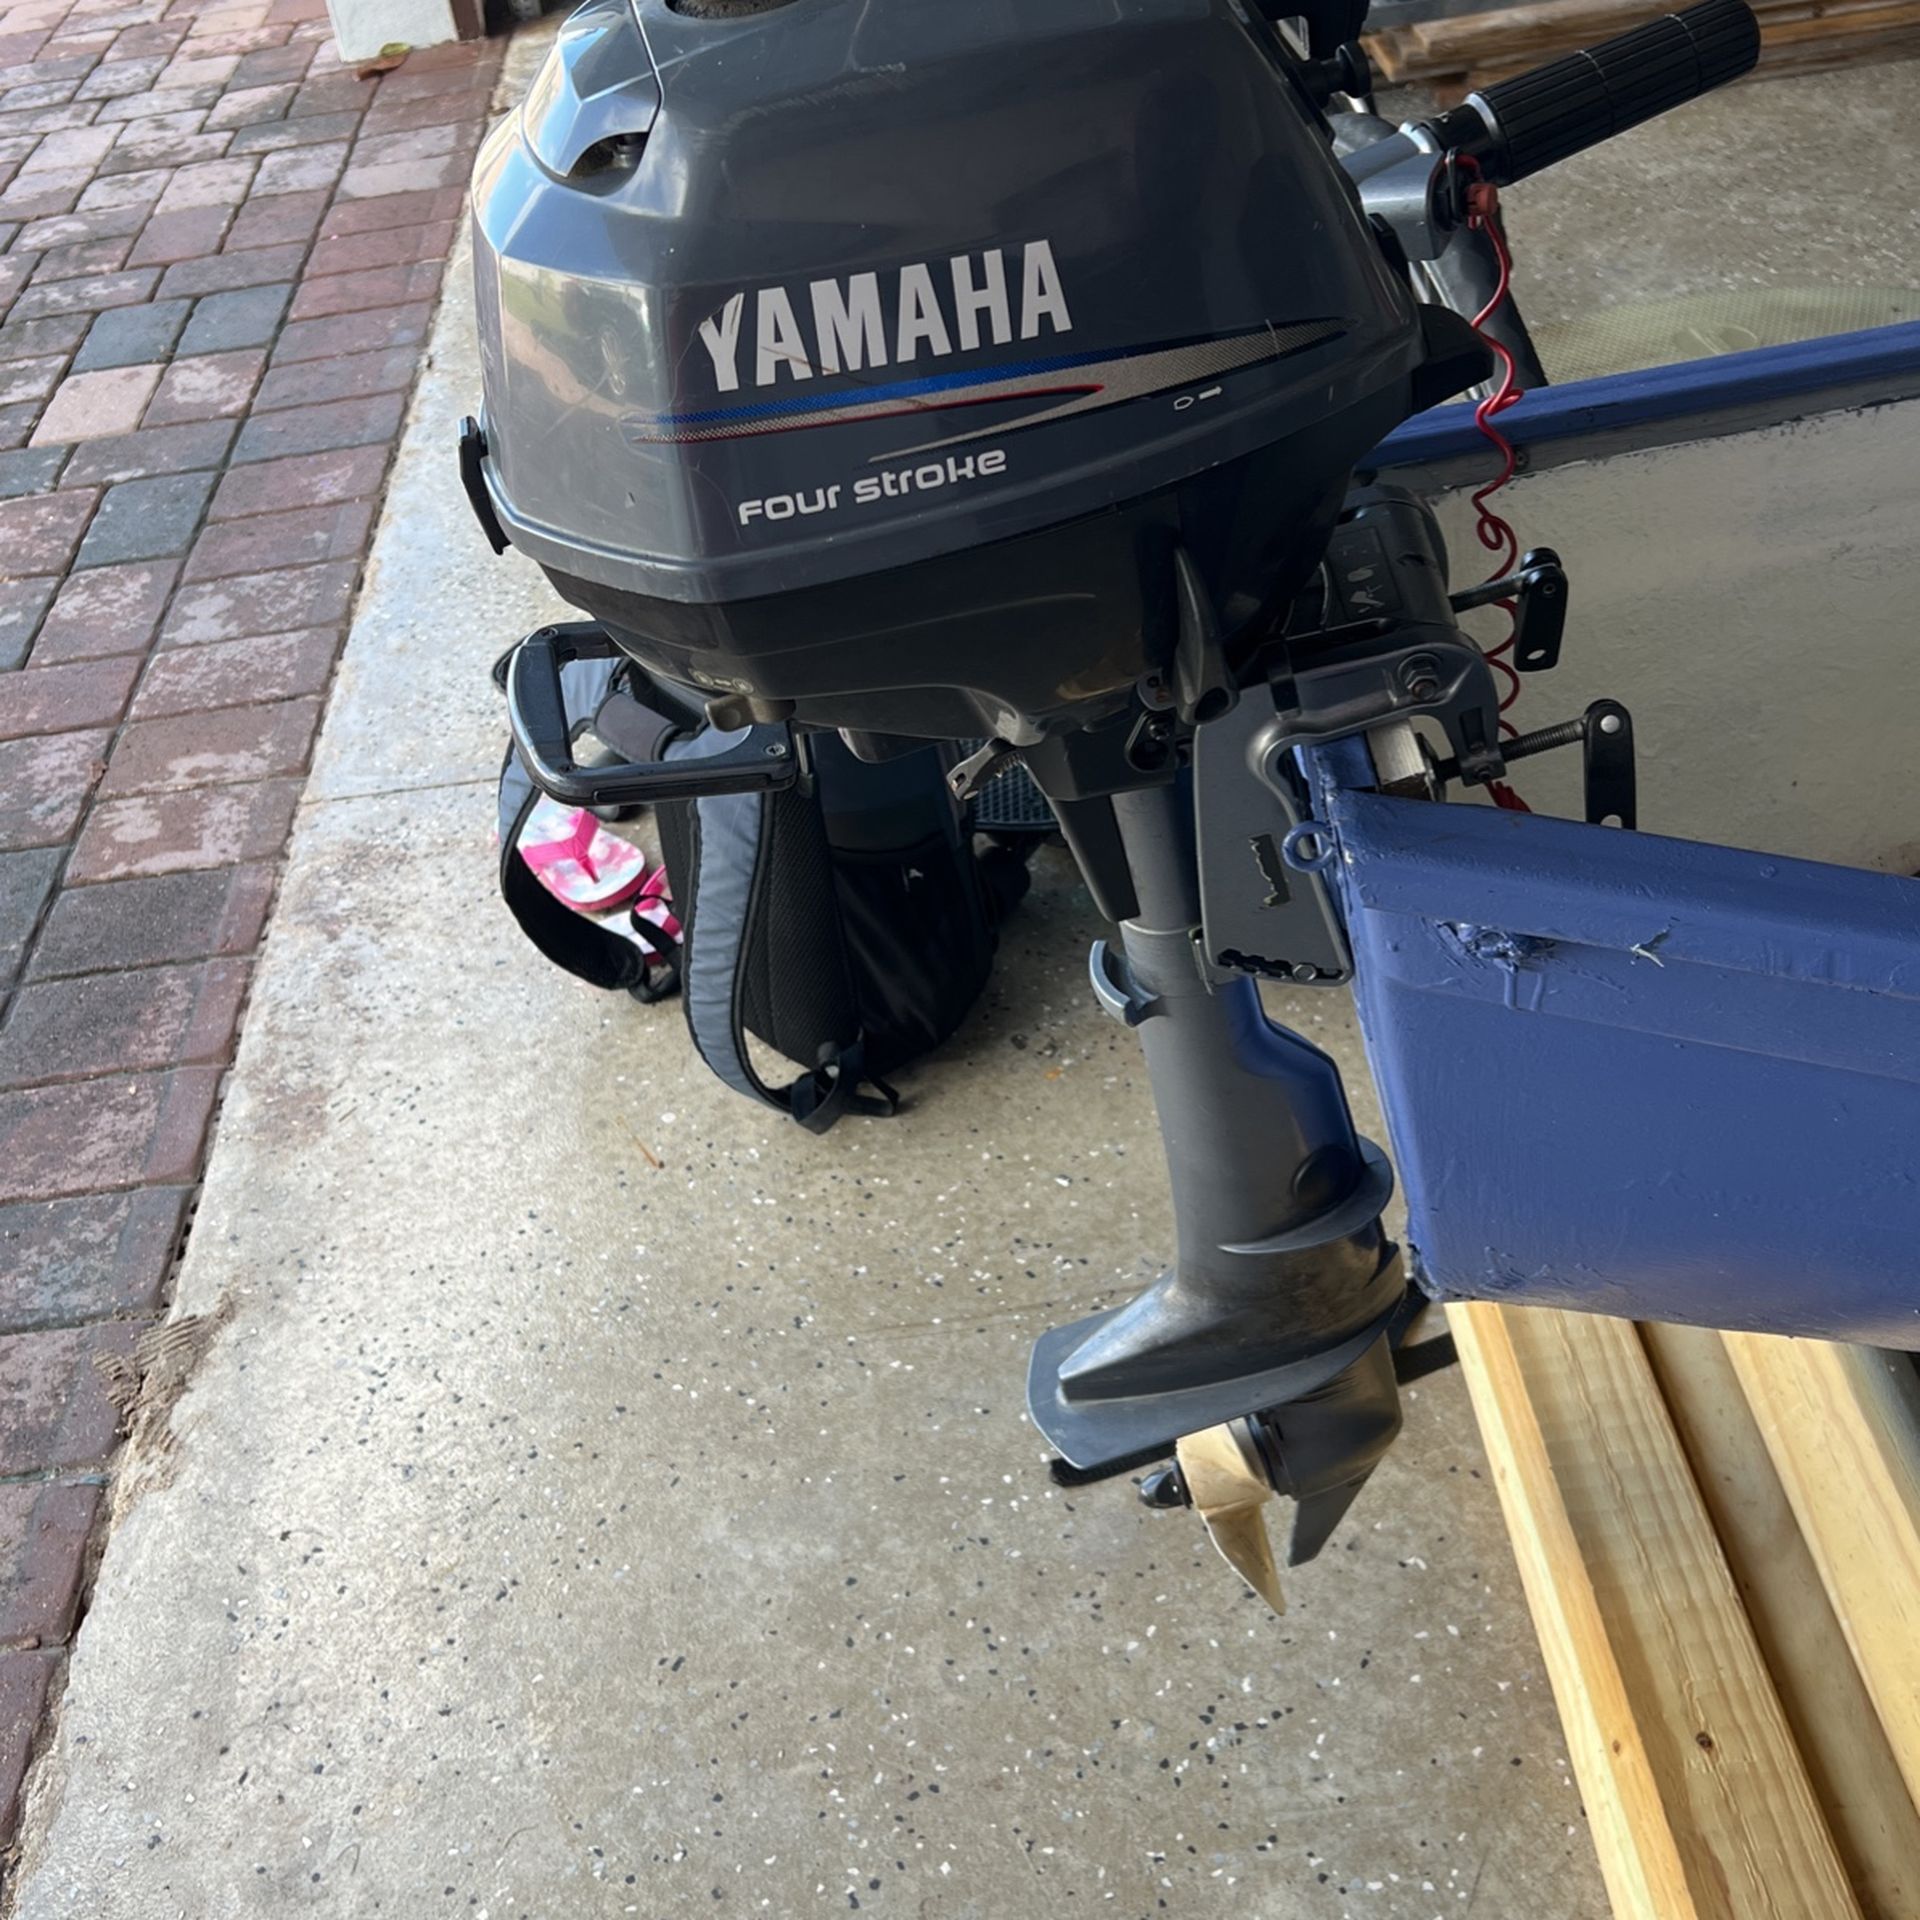 Yamaha 2.5 Four Stroke Boat motor (for Canoes Or Small Boats)